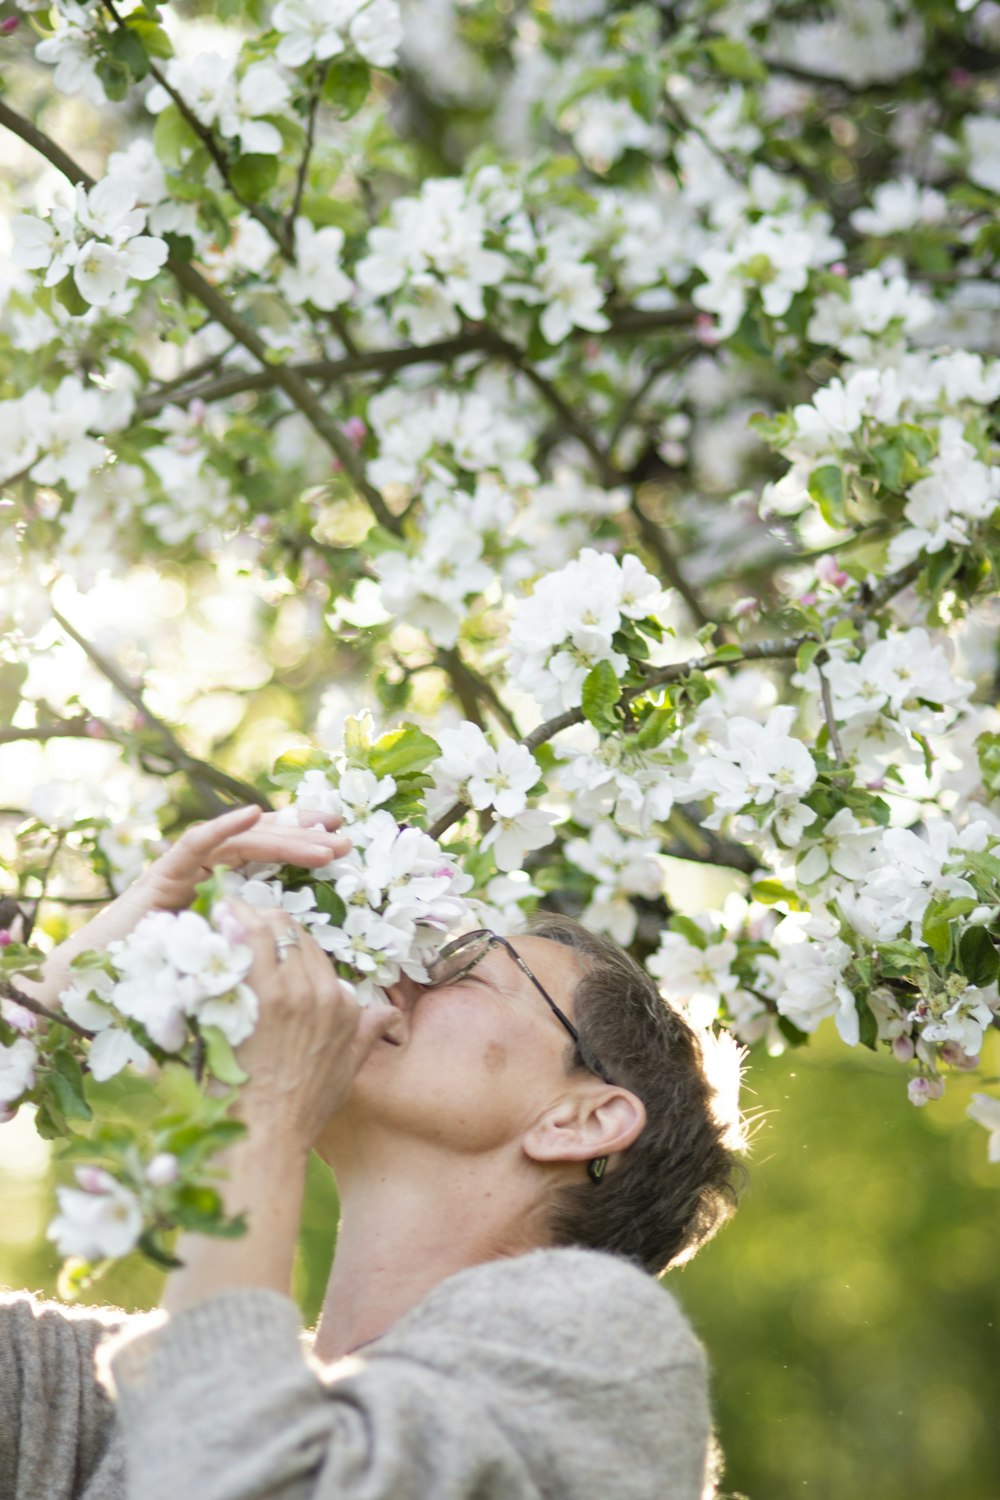 a man is smelling a tree with white flowers